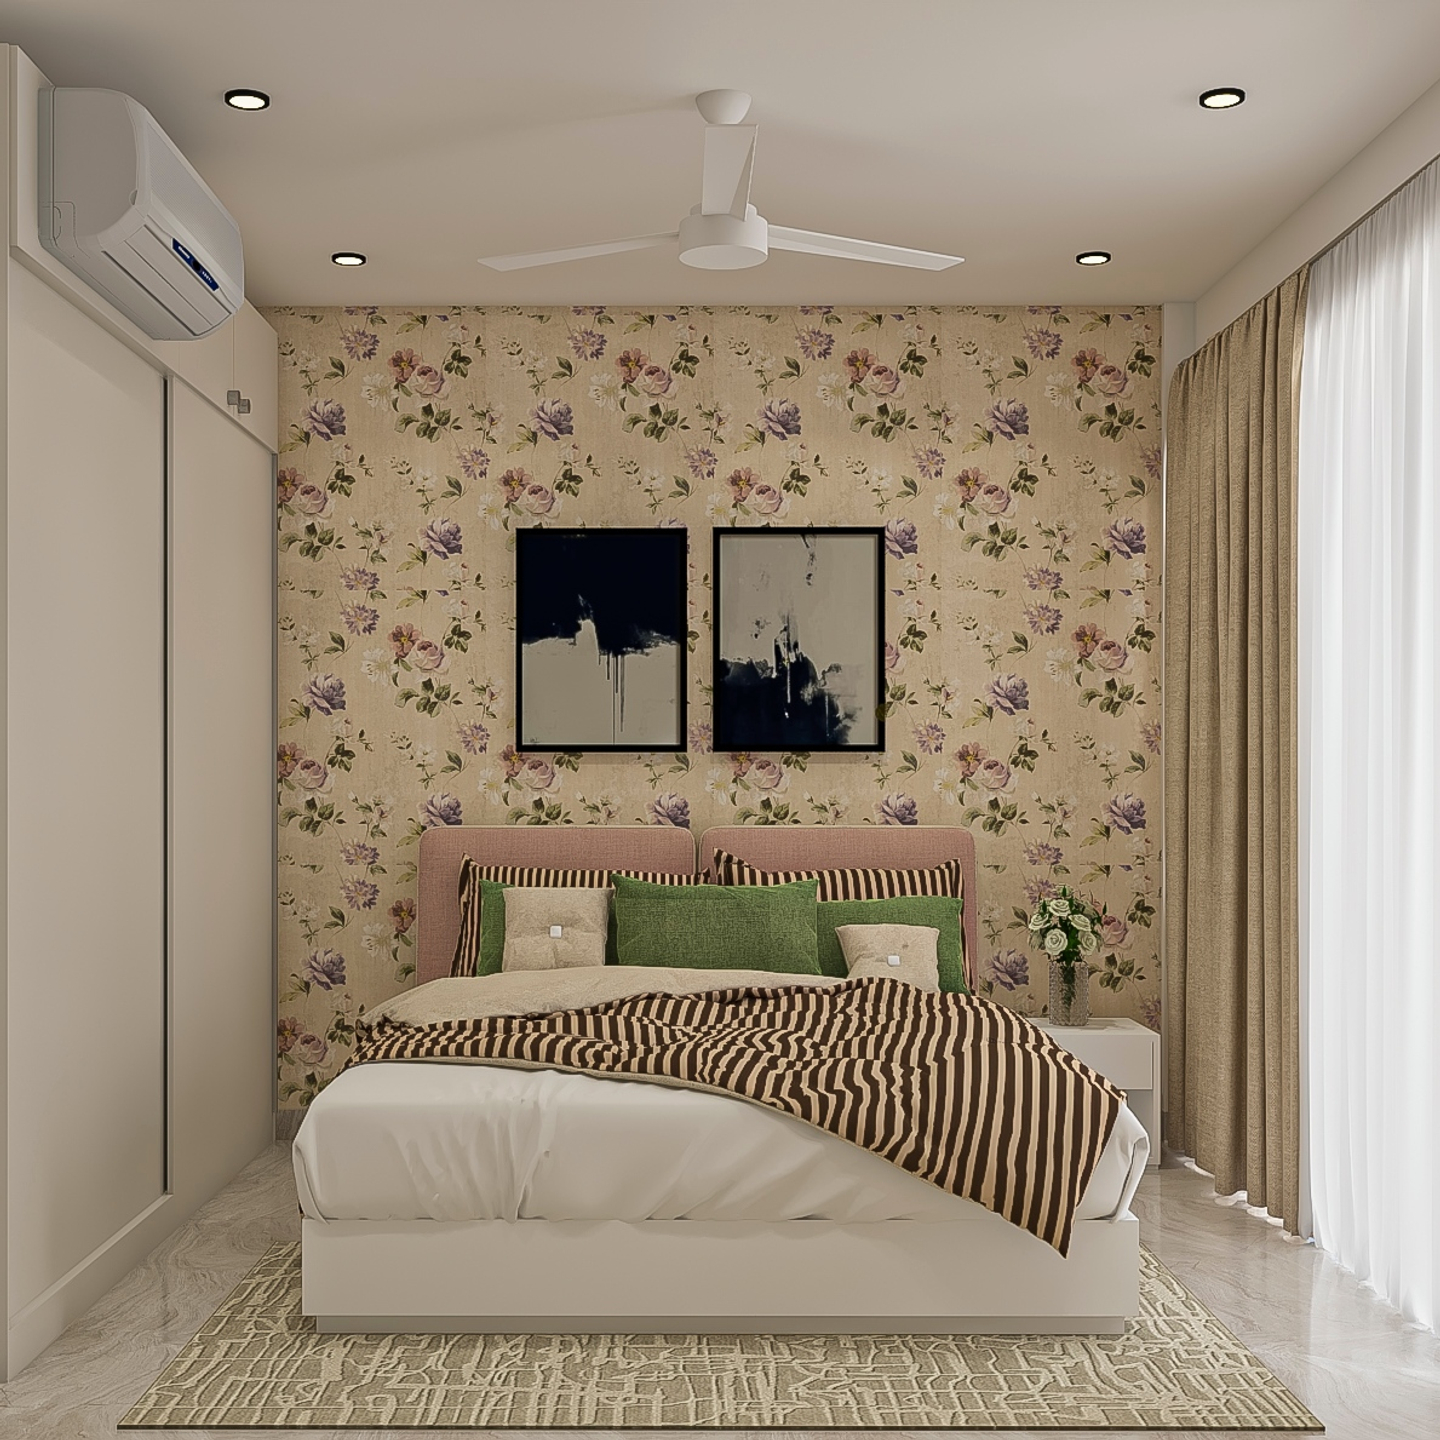 Guest Room With Floral Wallpaper - Livspace